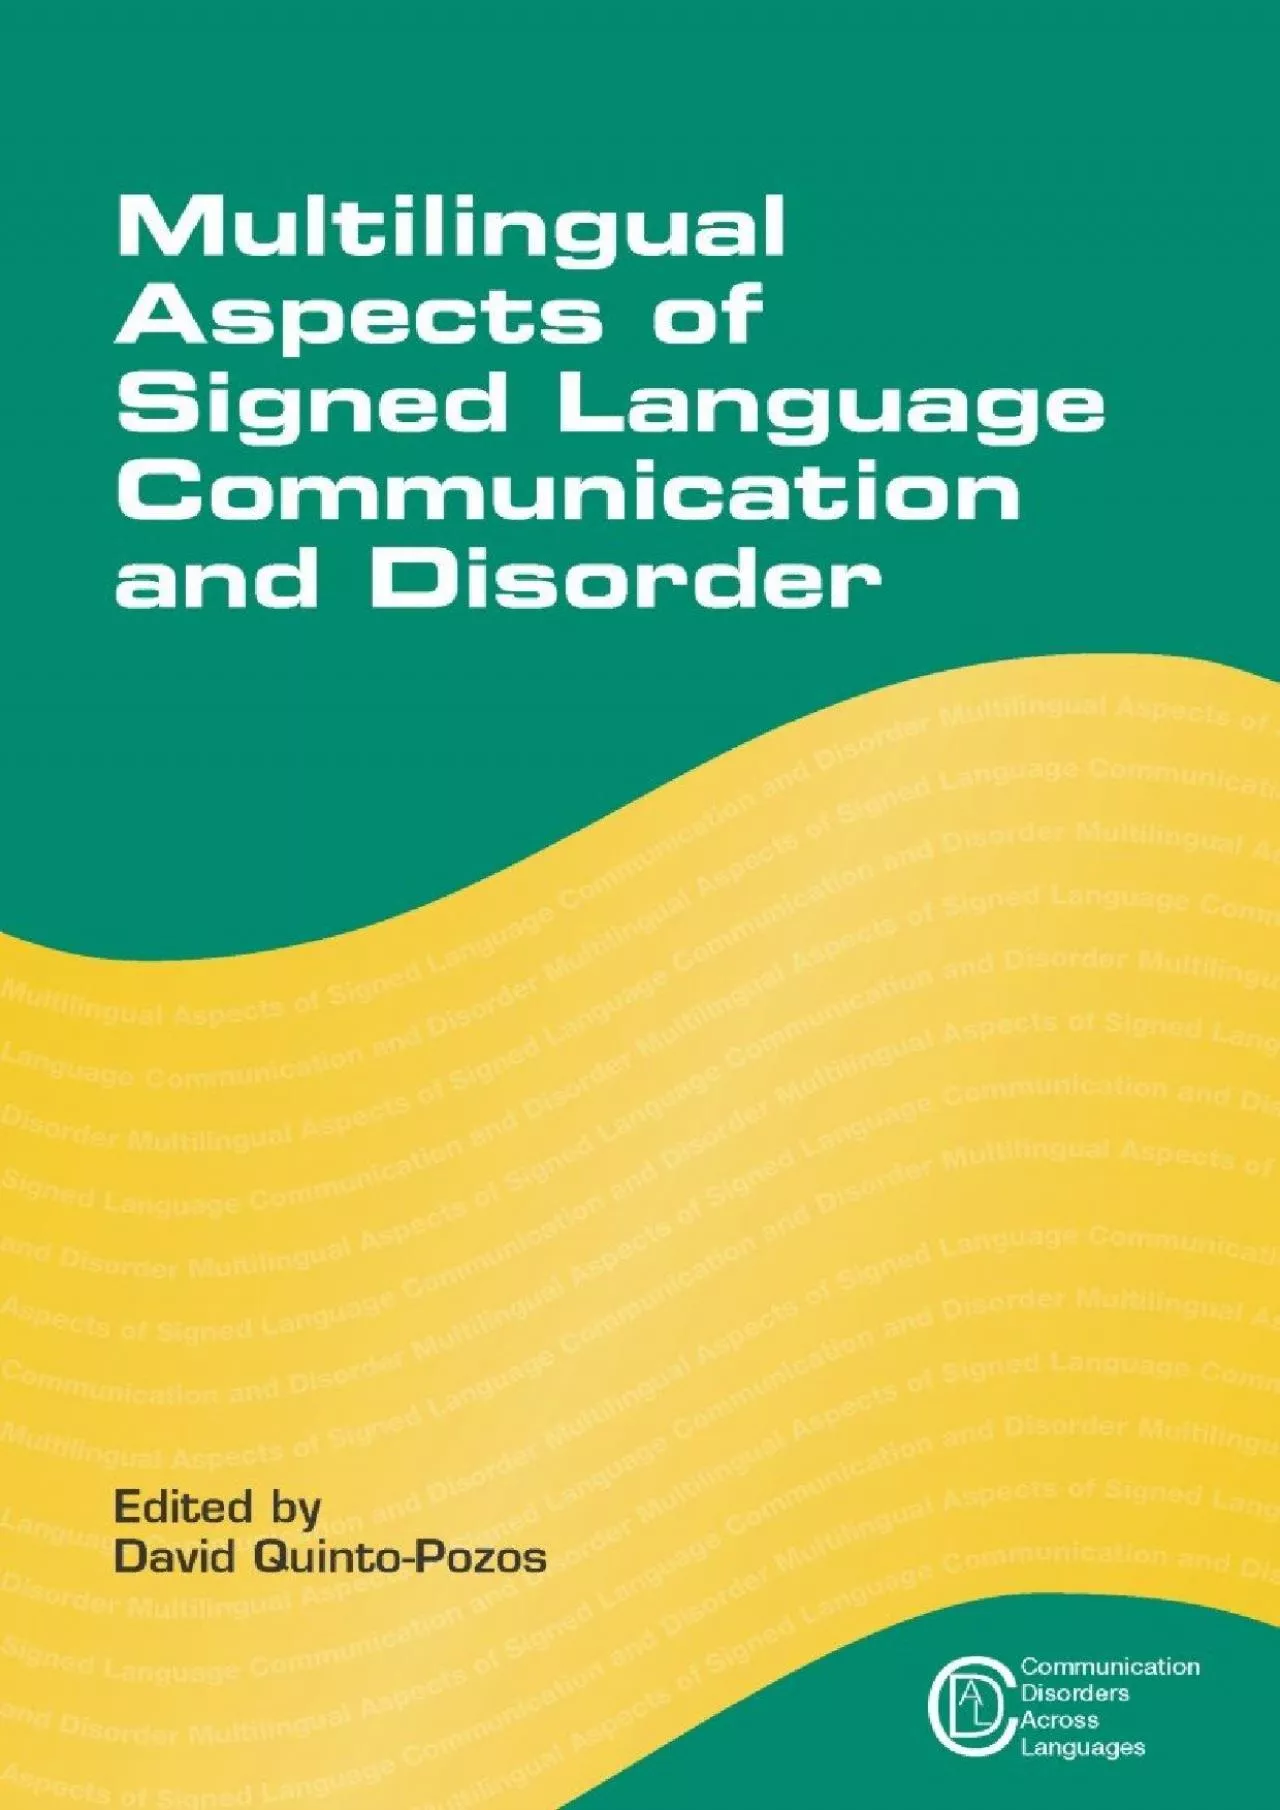 (BOOS)-Multilingual Aspects of Signed Language Communication and Disorder (Communication